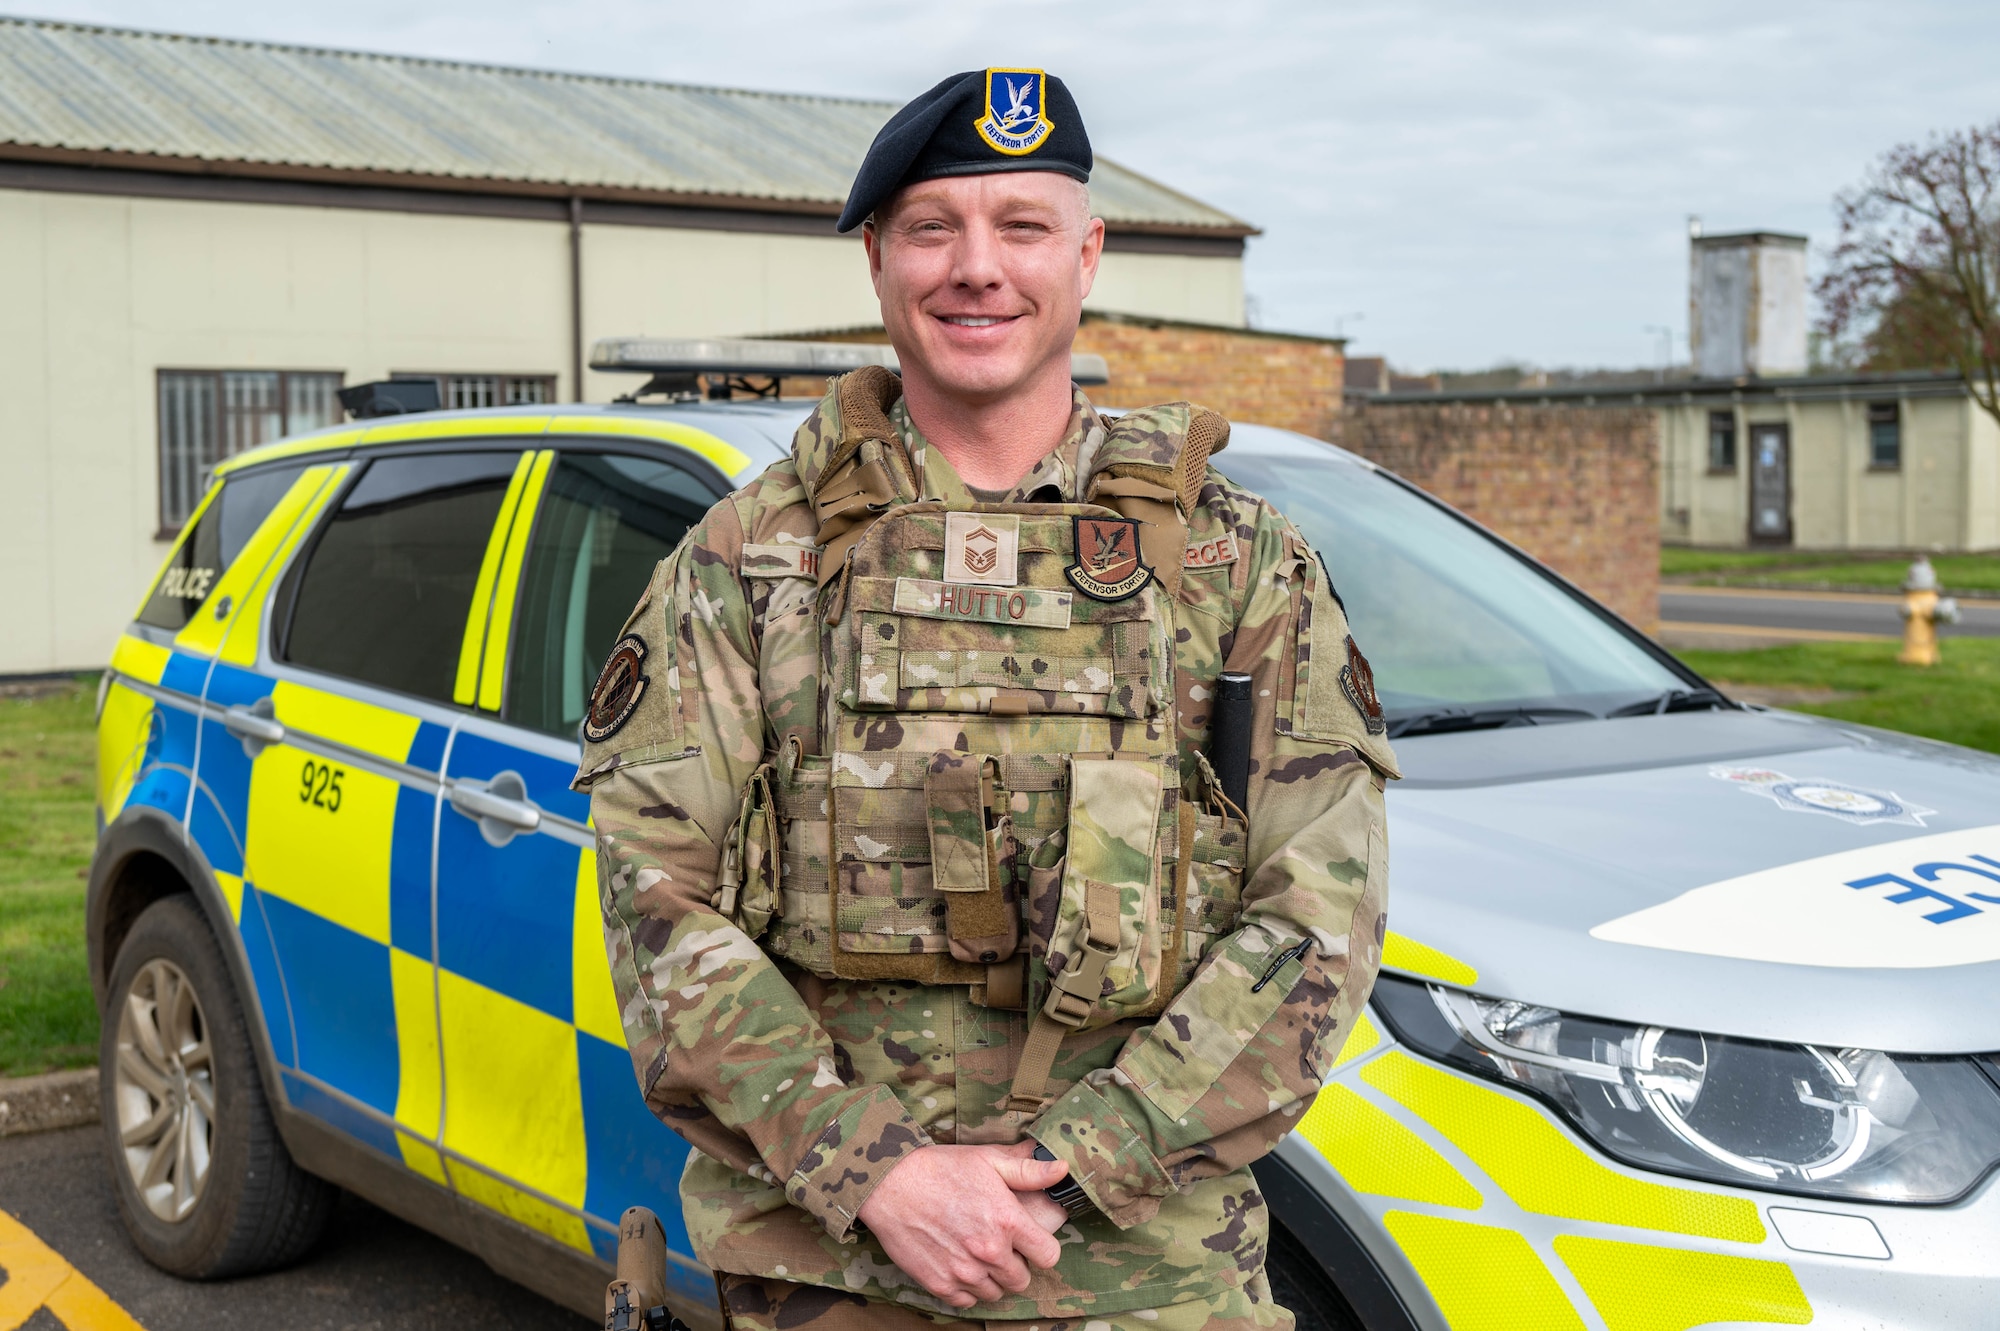 An Airman smiles for a photo outside of a British police car